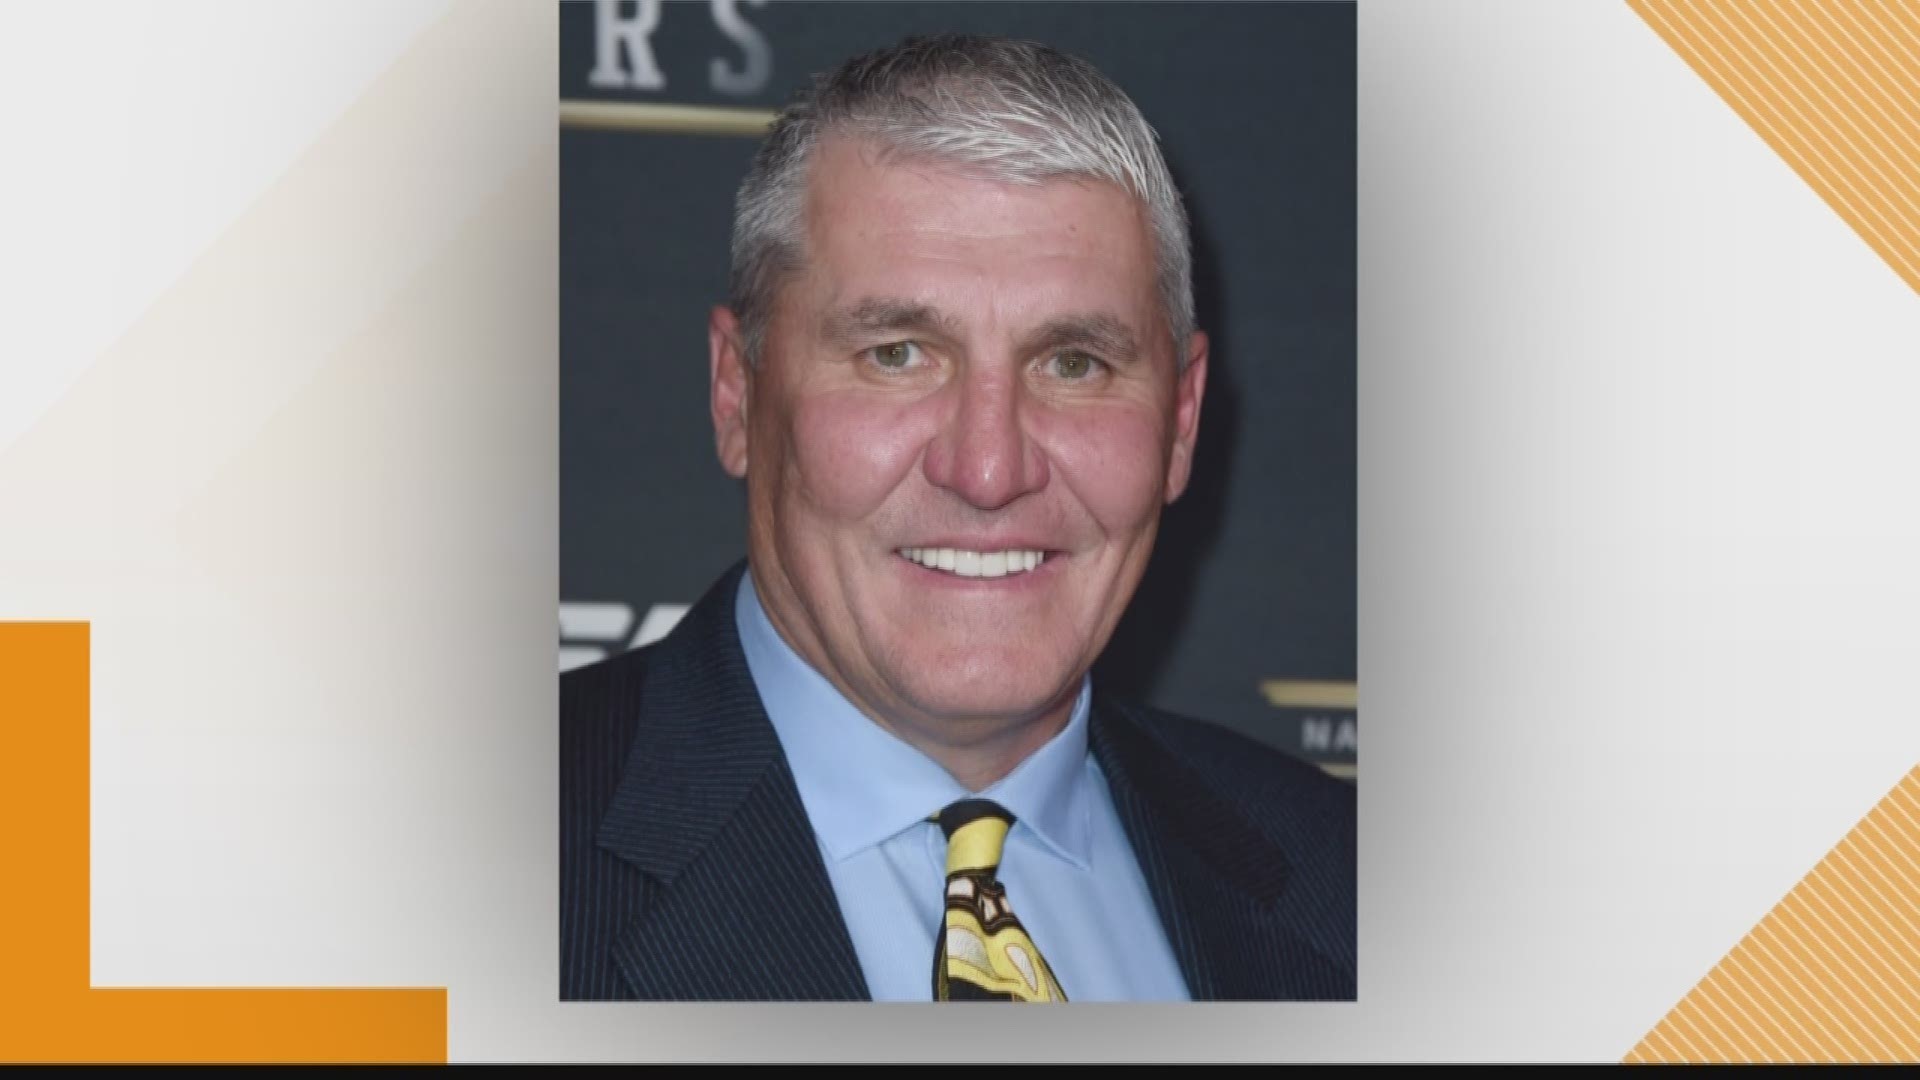 According to a spokesman at the Spokane Police Department, Mark Rypien was arrested for domestic violence/assault.